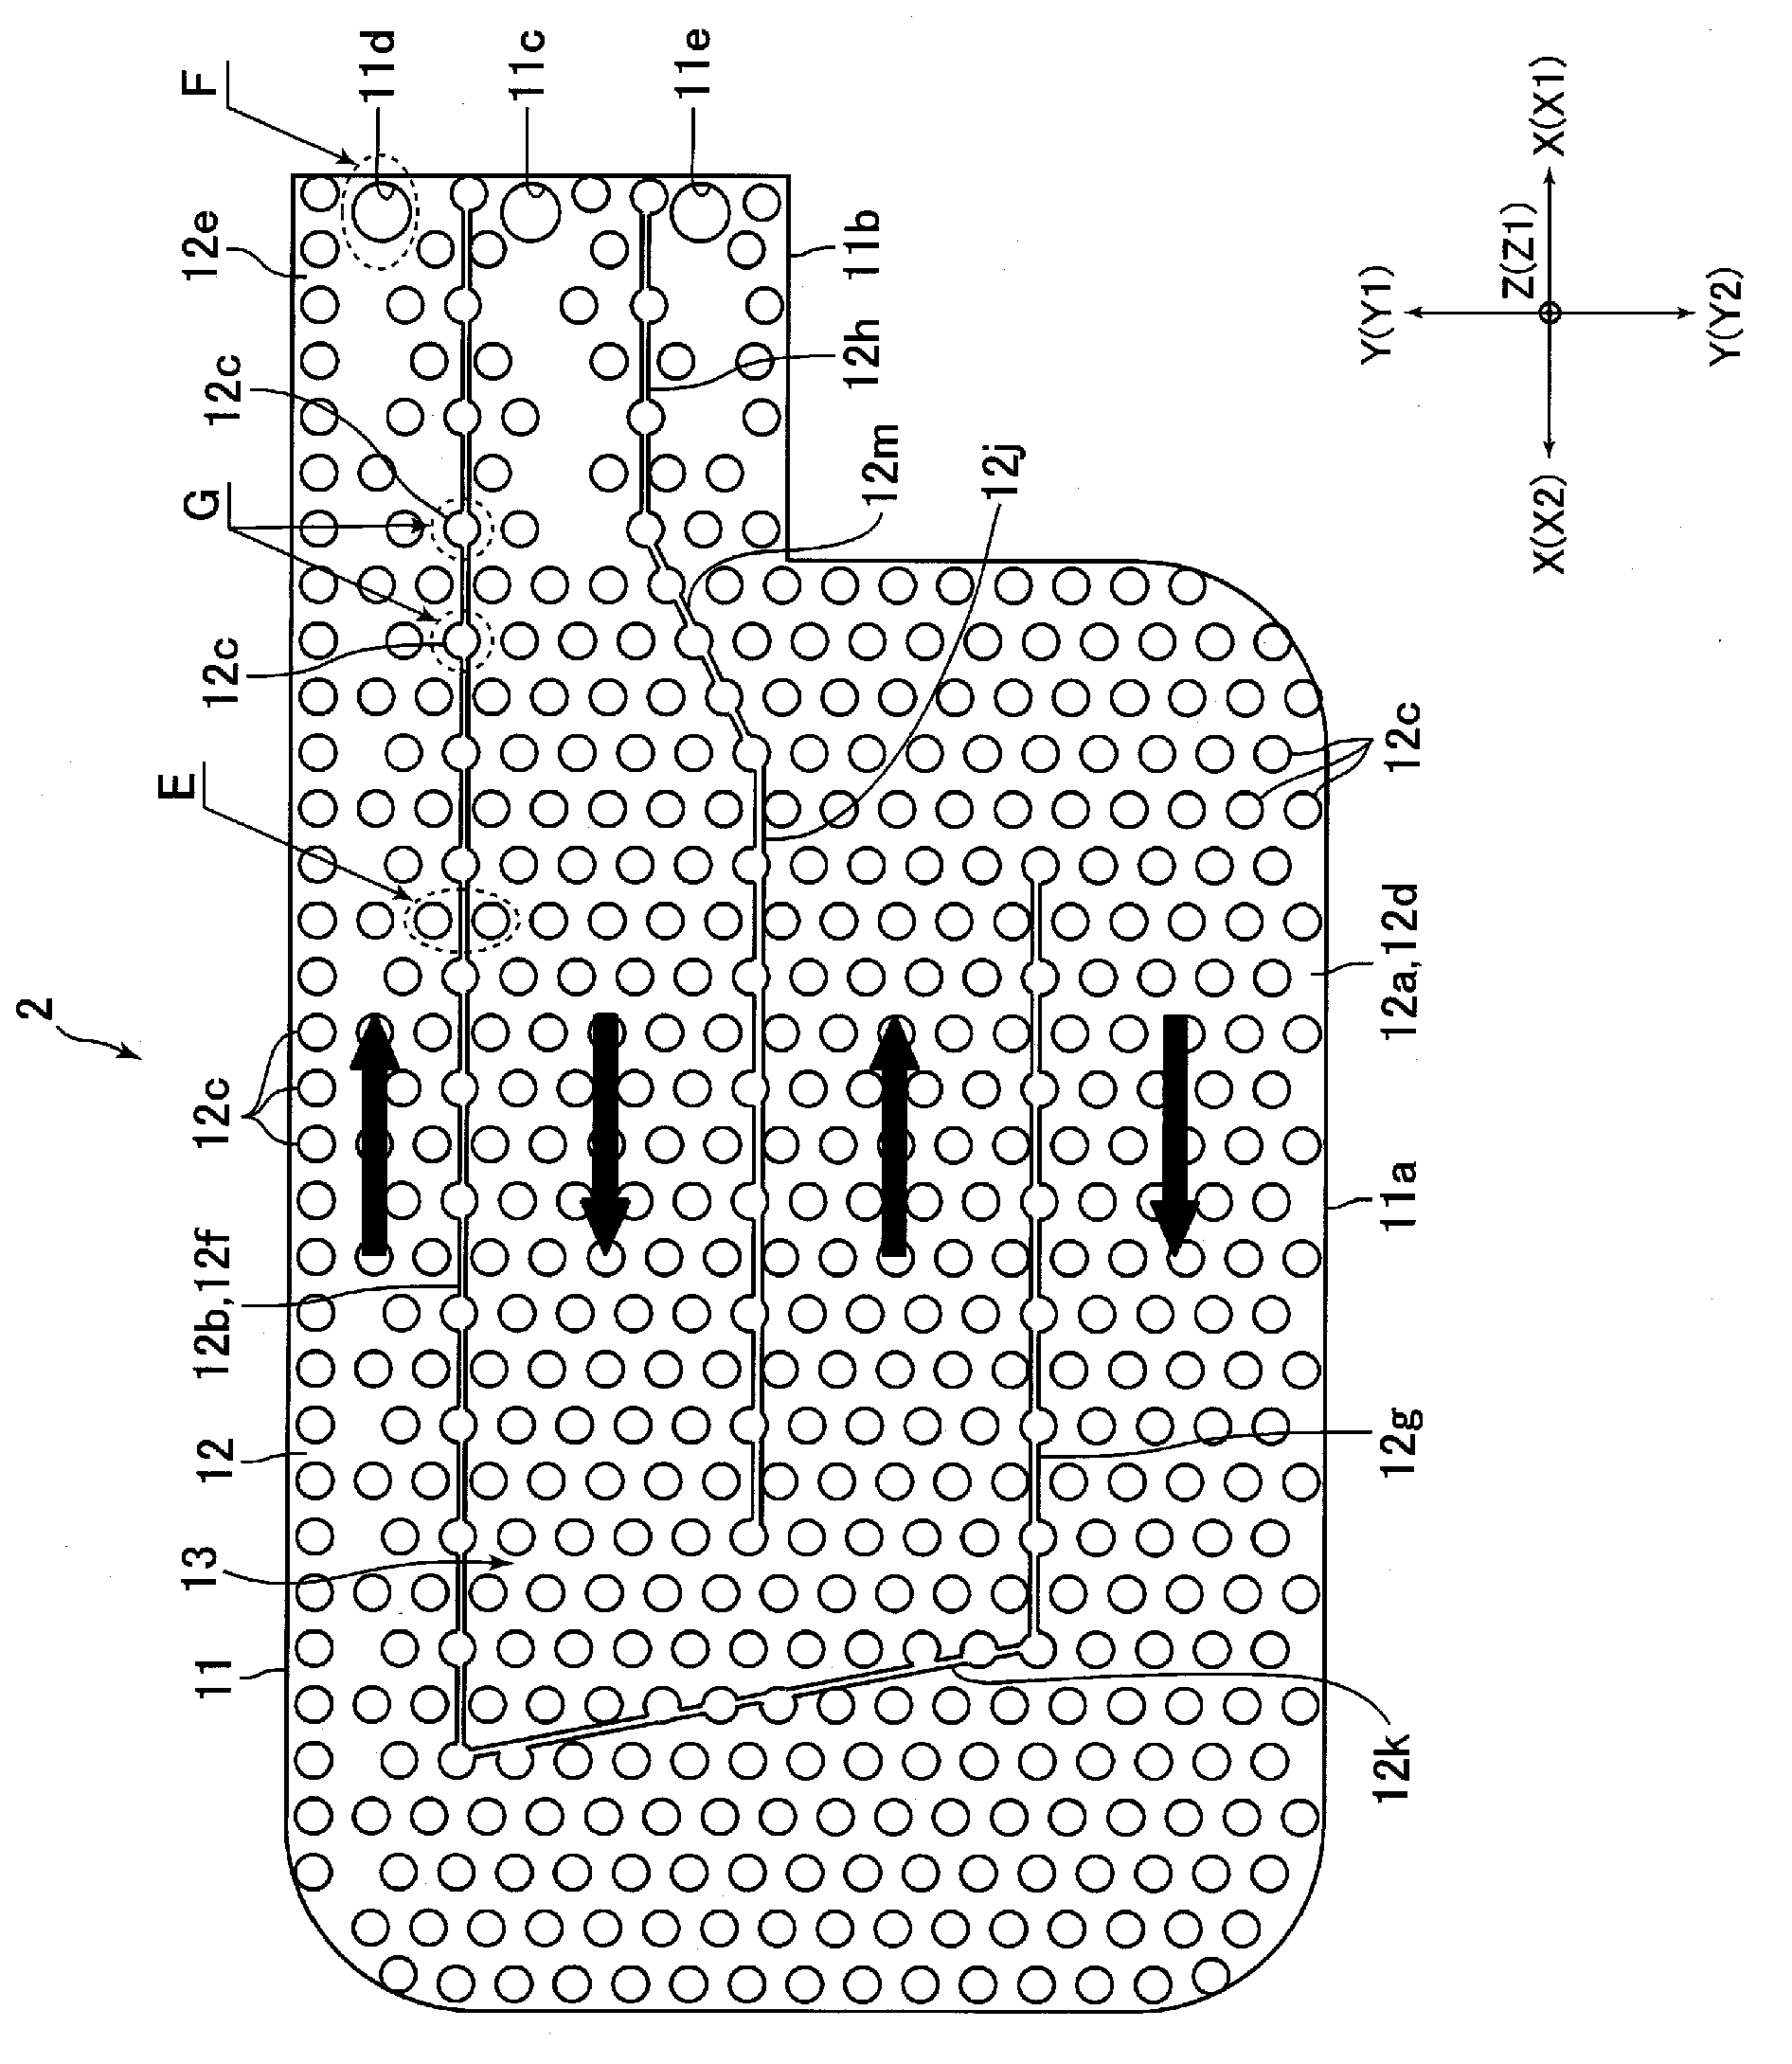 Head-cooling pillow and head-cooling device